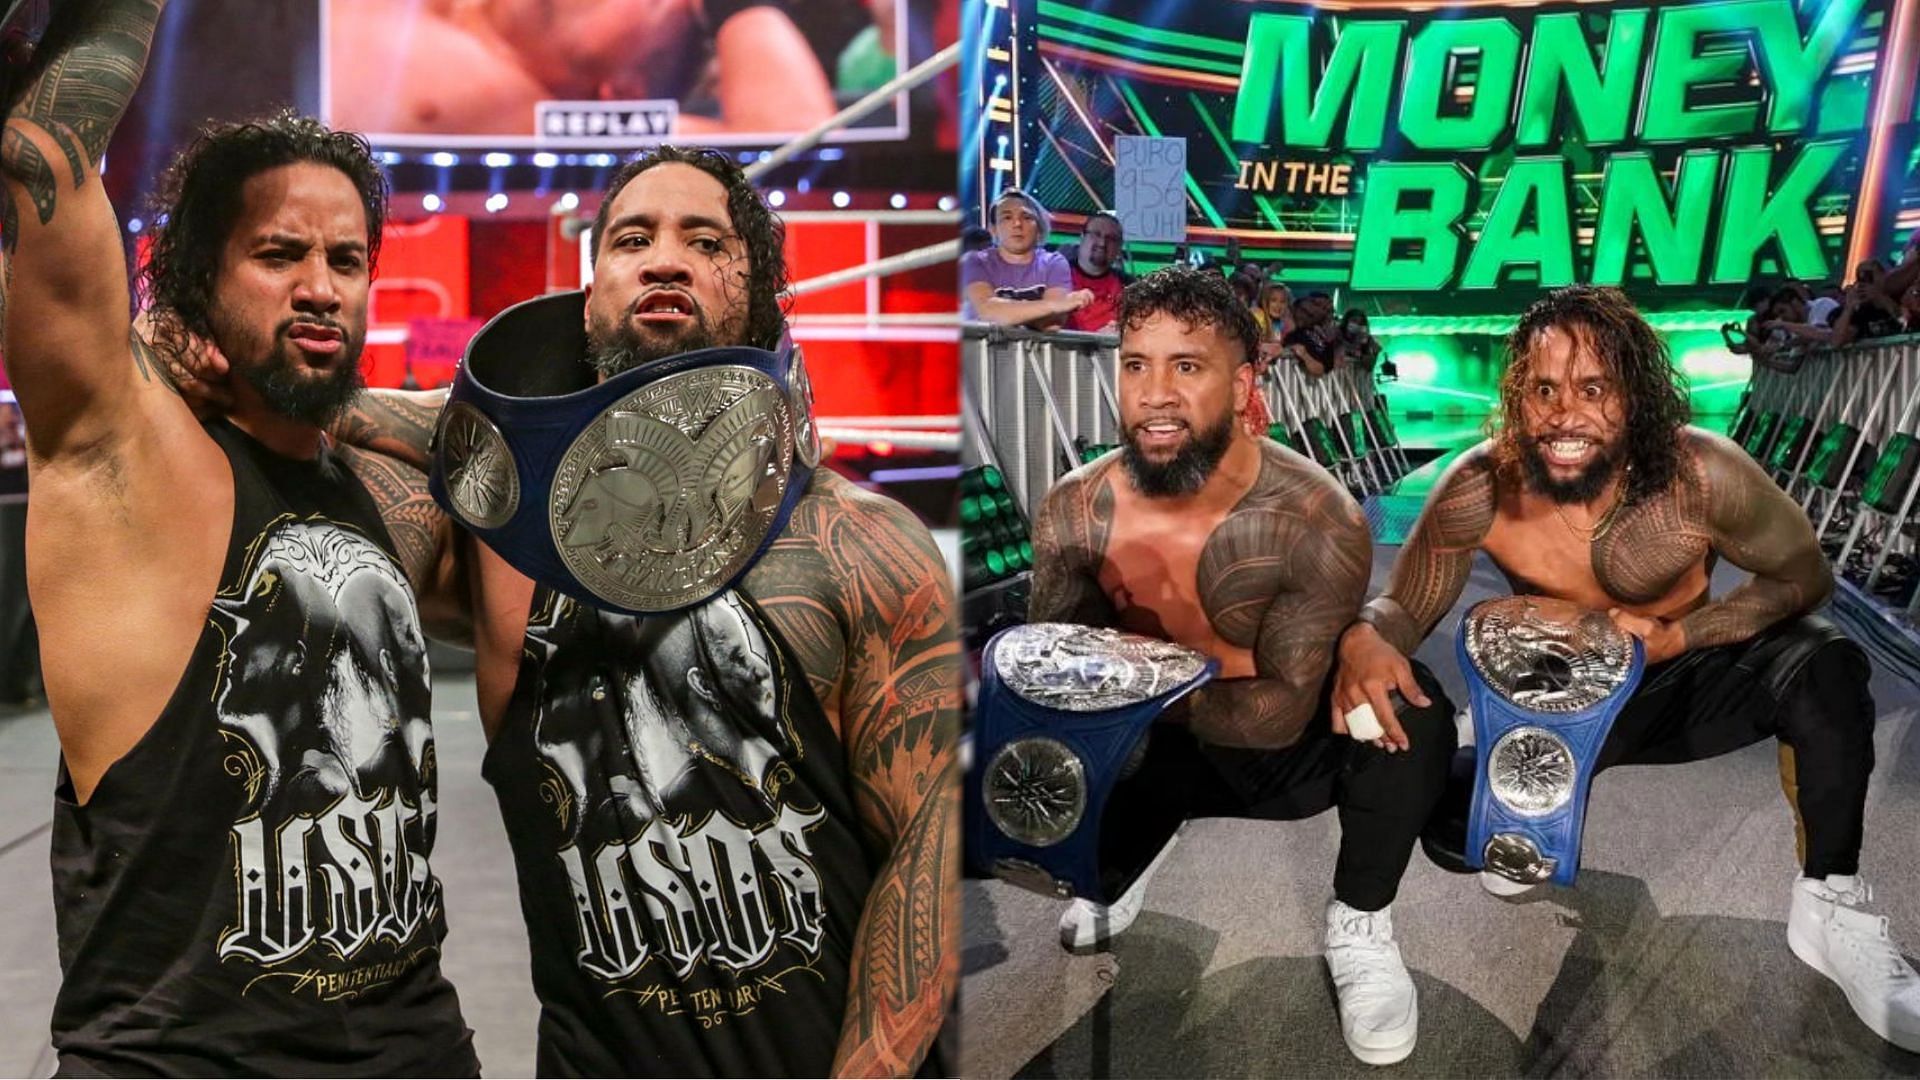 "Gotta give The Usos their flowers" Prominent WWE Tag Team star